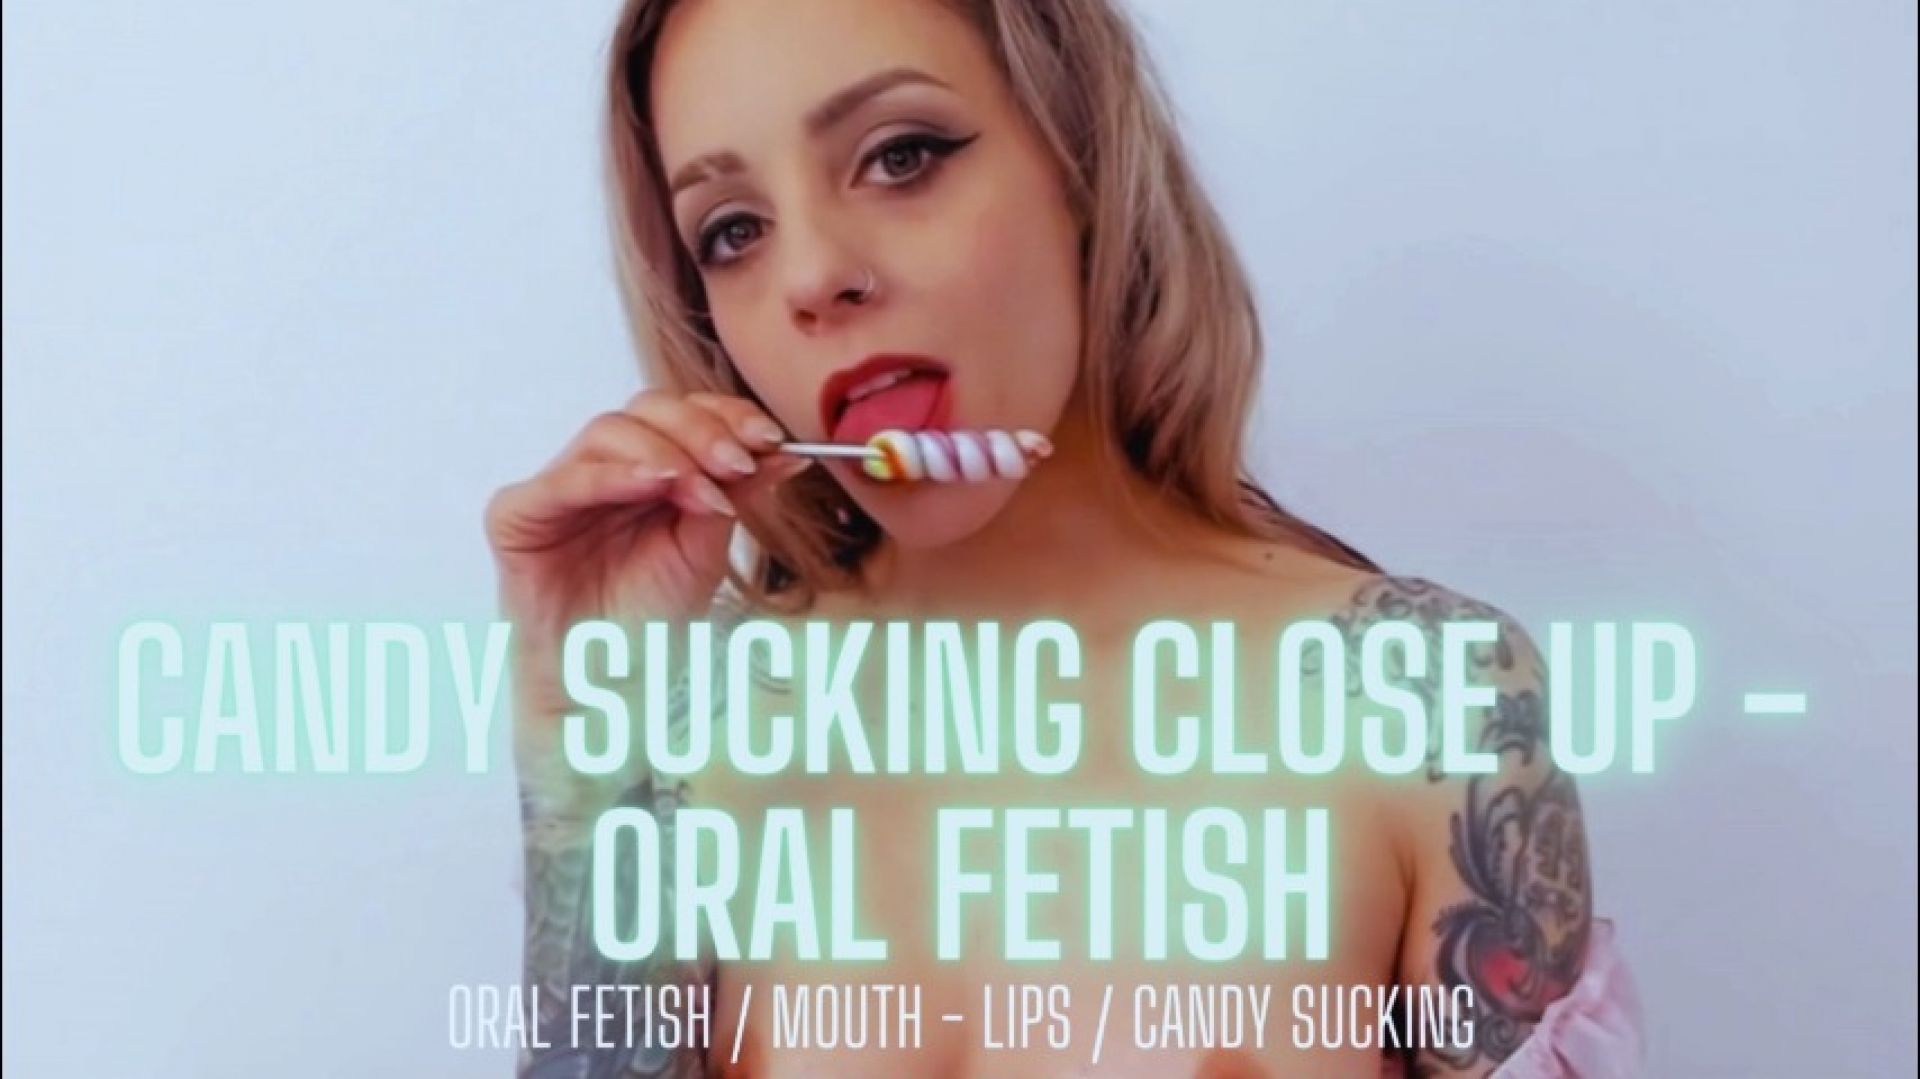 Candy Sucking Close Up - Oral Fetish